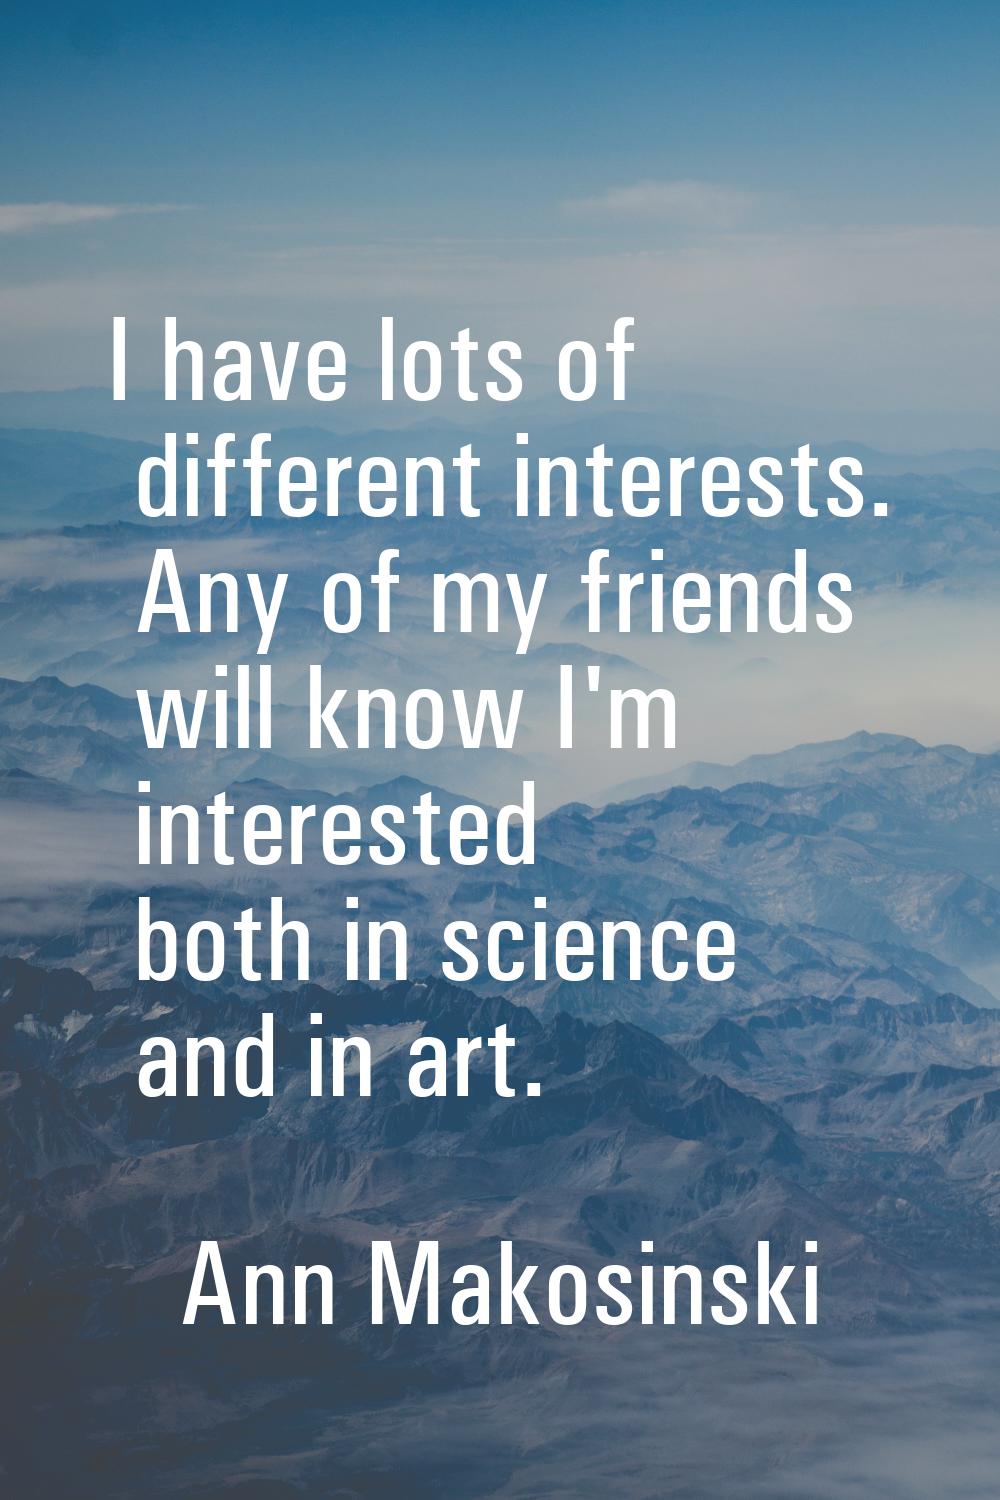 I have lots of different interests. Any of my friends will know I'm interested both in science and 